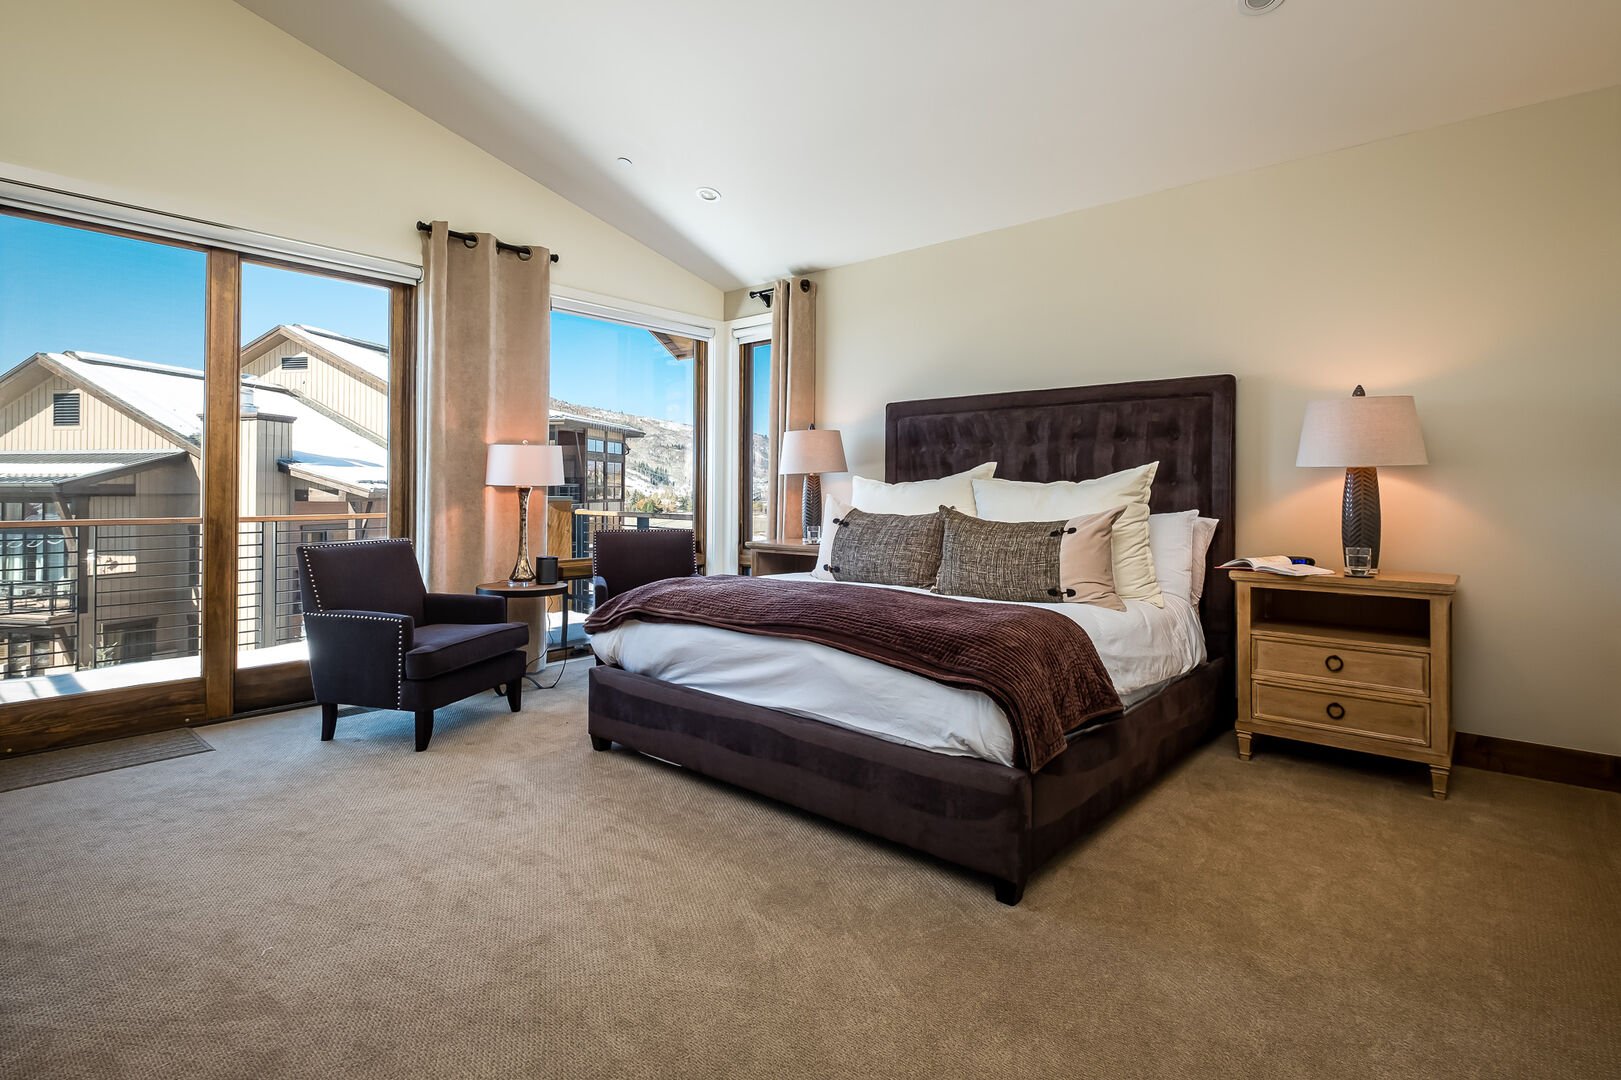 A generous primary suite awaits you upstairs at Gondola Pointe.